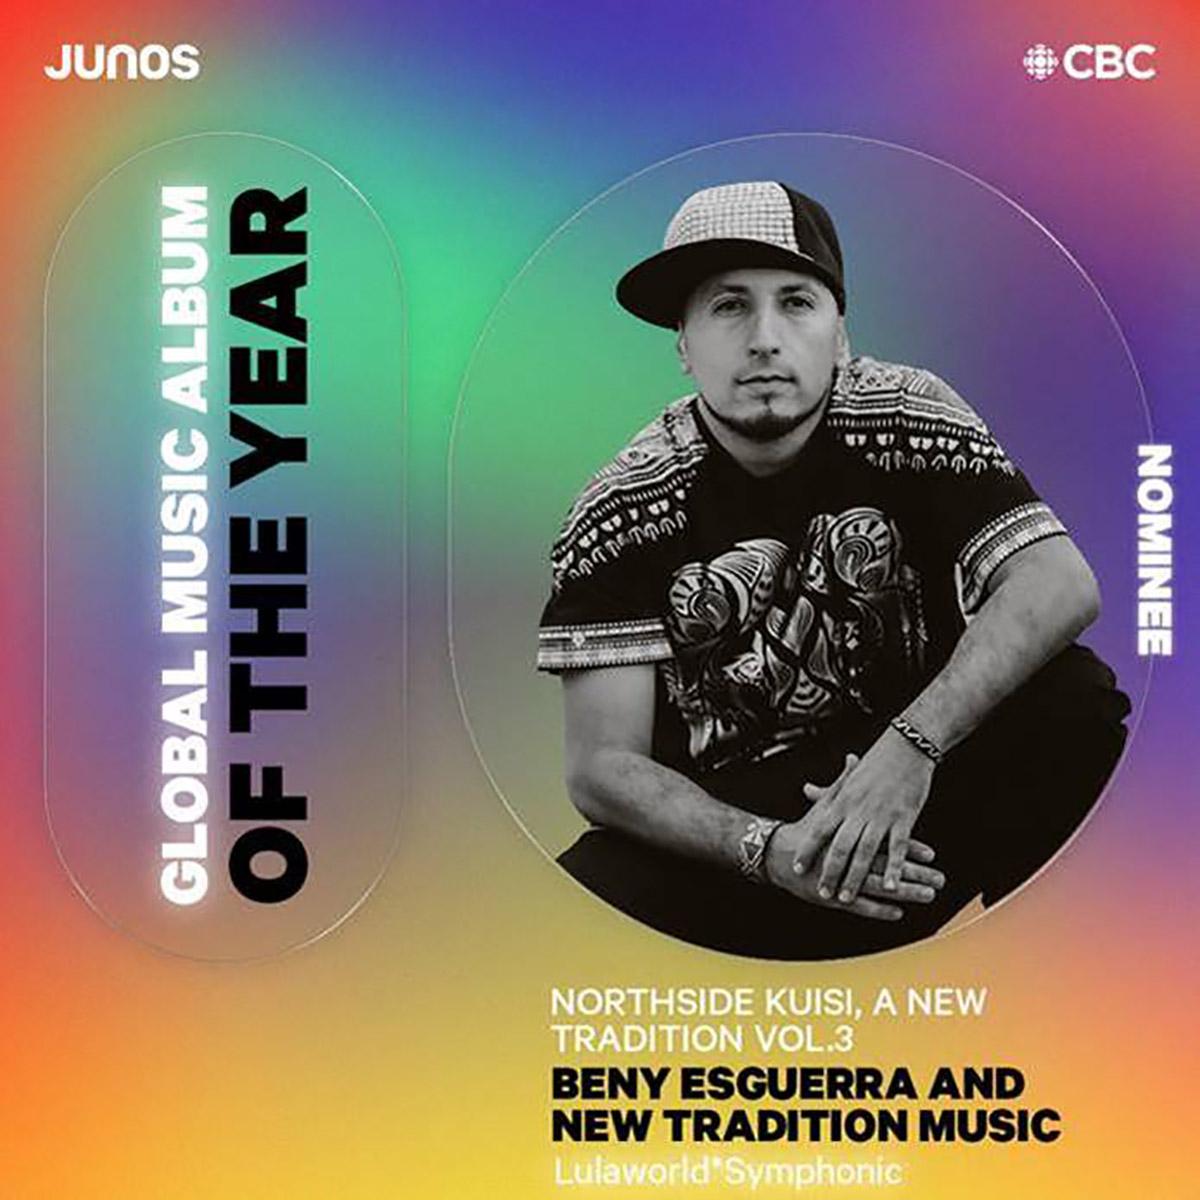 Beny Esguerra and New Tradition Music Nominated For 2022 Juno